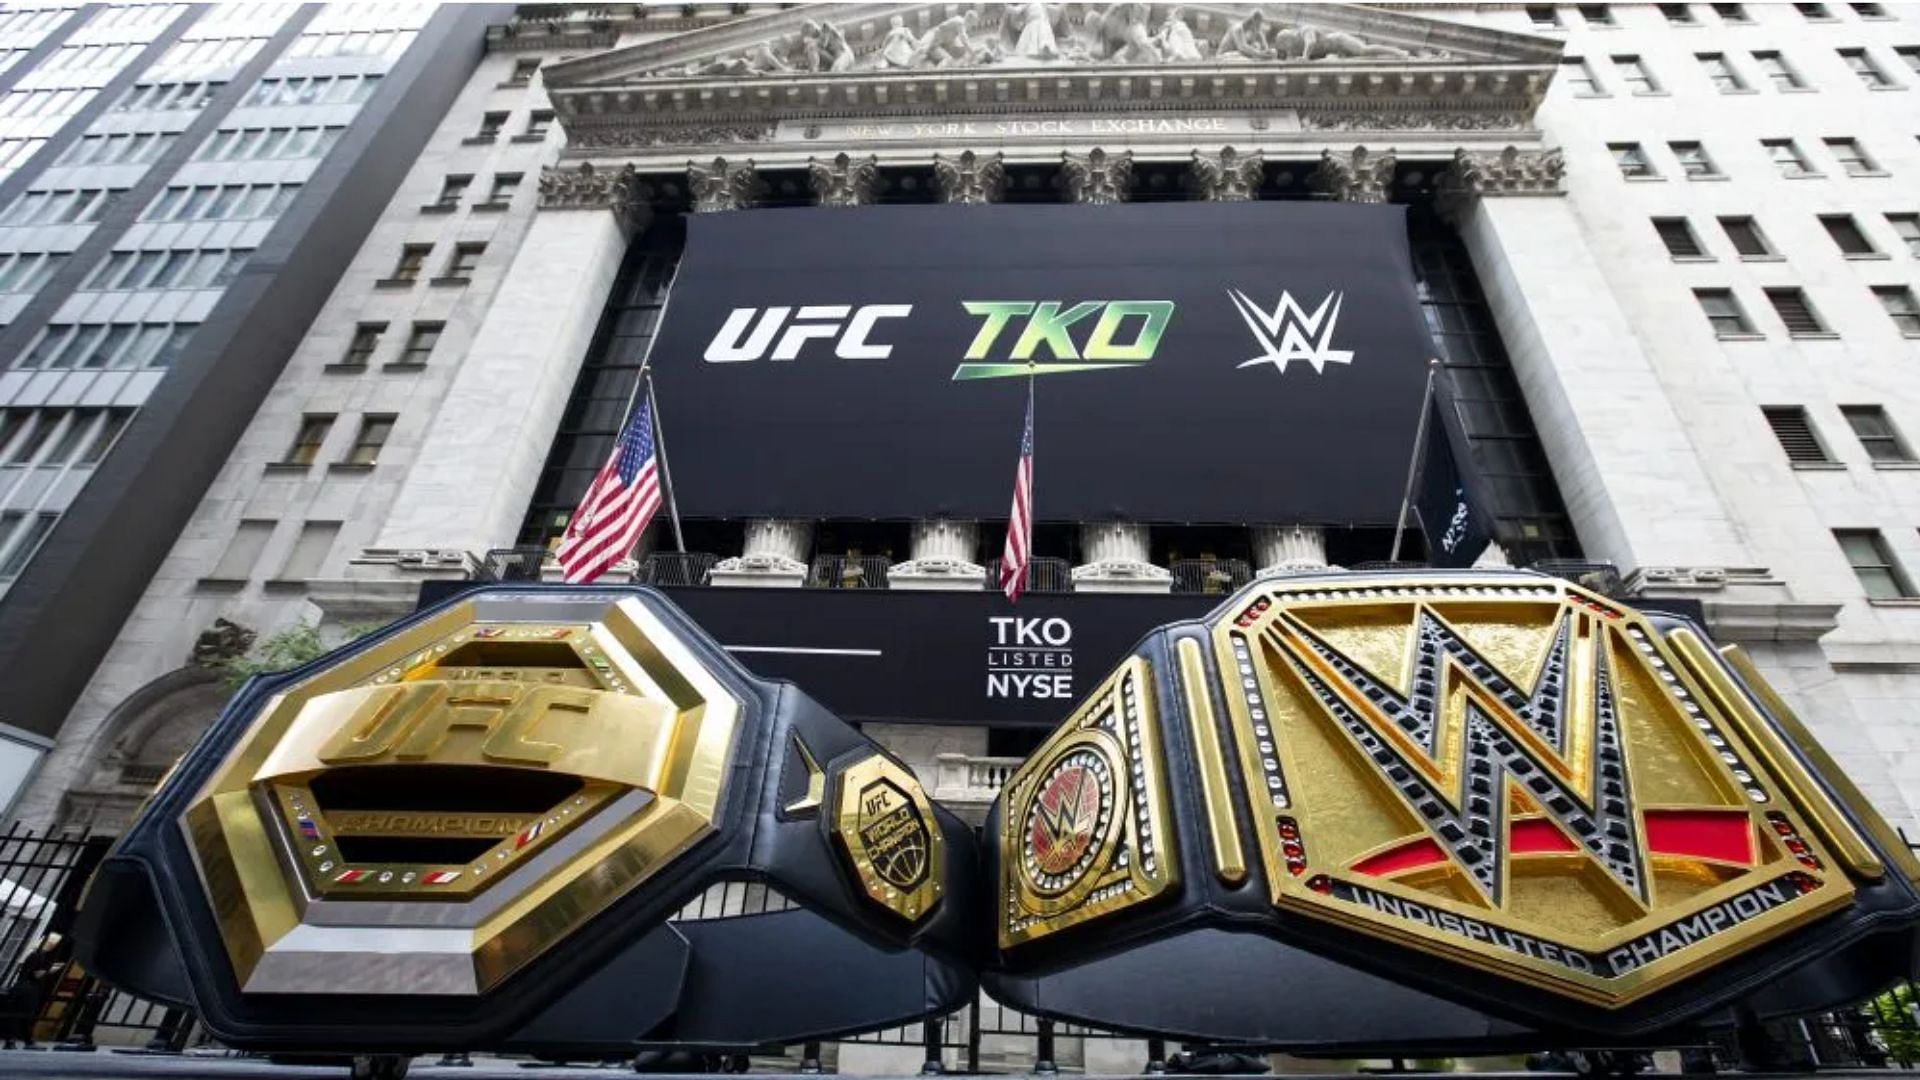 WWE merged with UFC to form TKO Group Holdings